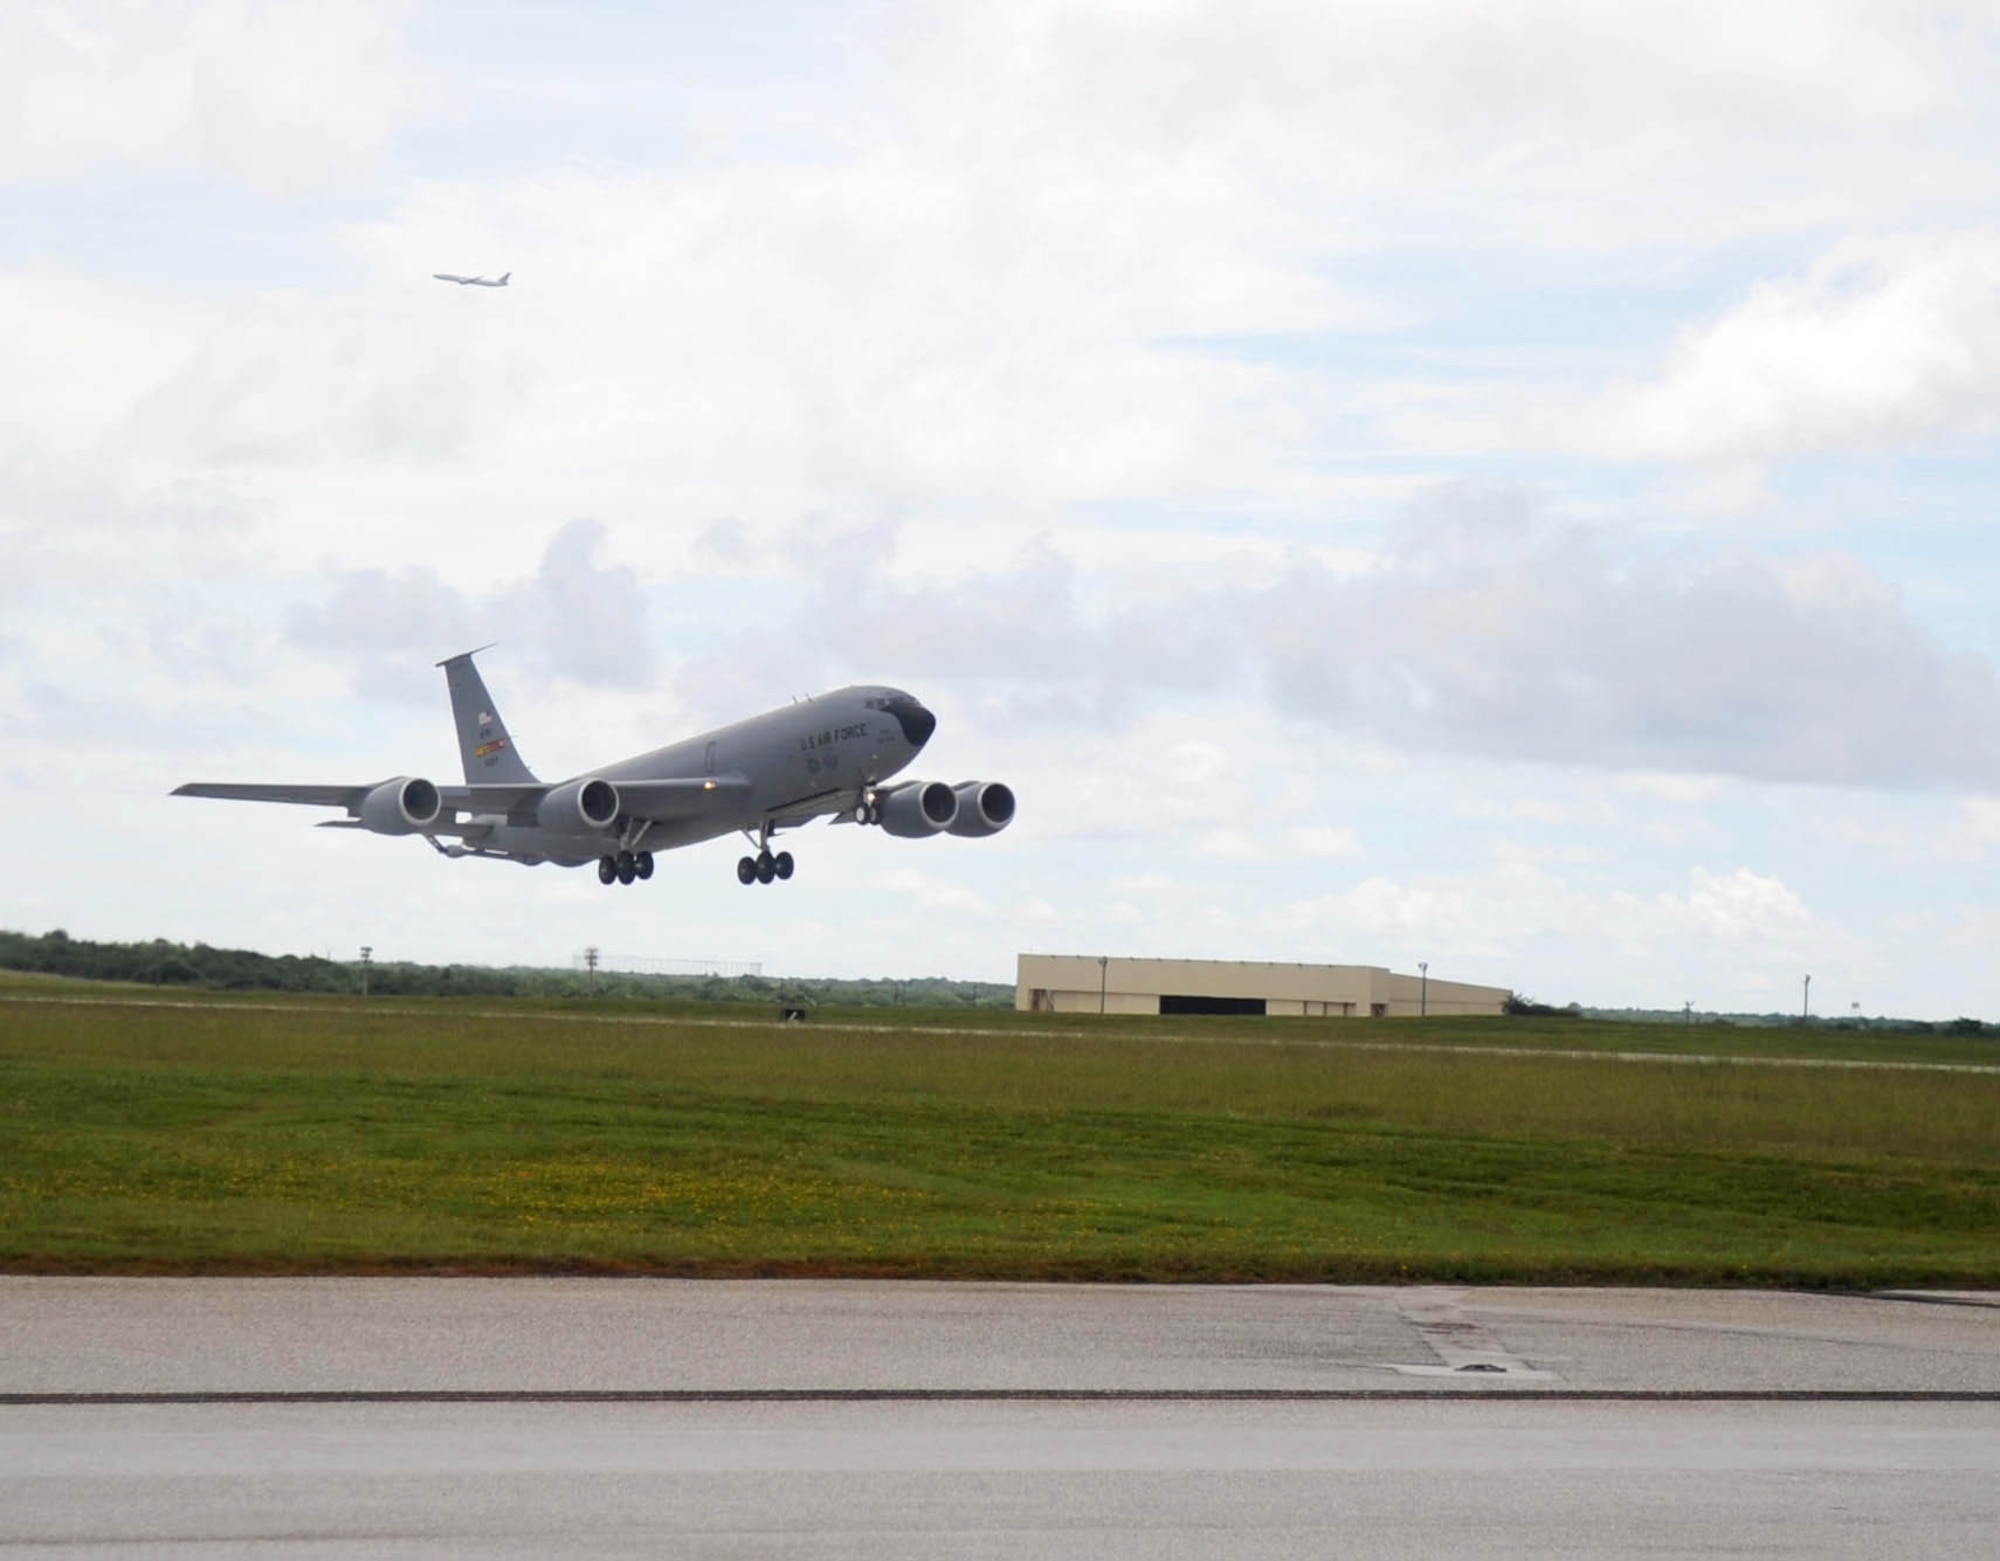 A KC-135 Stratotanker from the 506th Expeditionary Air Refueling Squadron Aug. 25, 2009, takes off from Andersen Air Force Base, Guam. The KC-135 is deployed to support U.S. Pacific Command's theater security package and continuous bomber presence in the Asia-Pacific region. (U.S. Air Force photo/Senior Airman Christopher Bush)